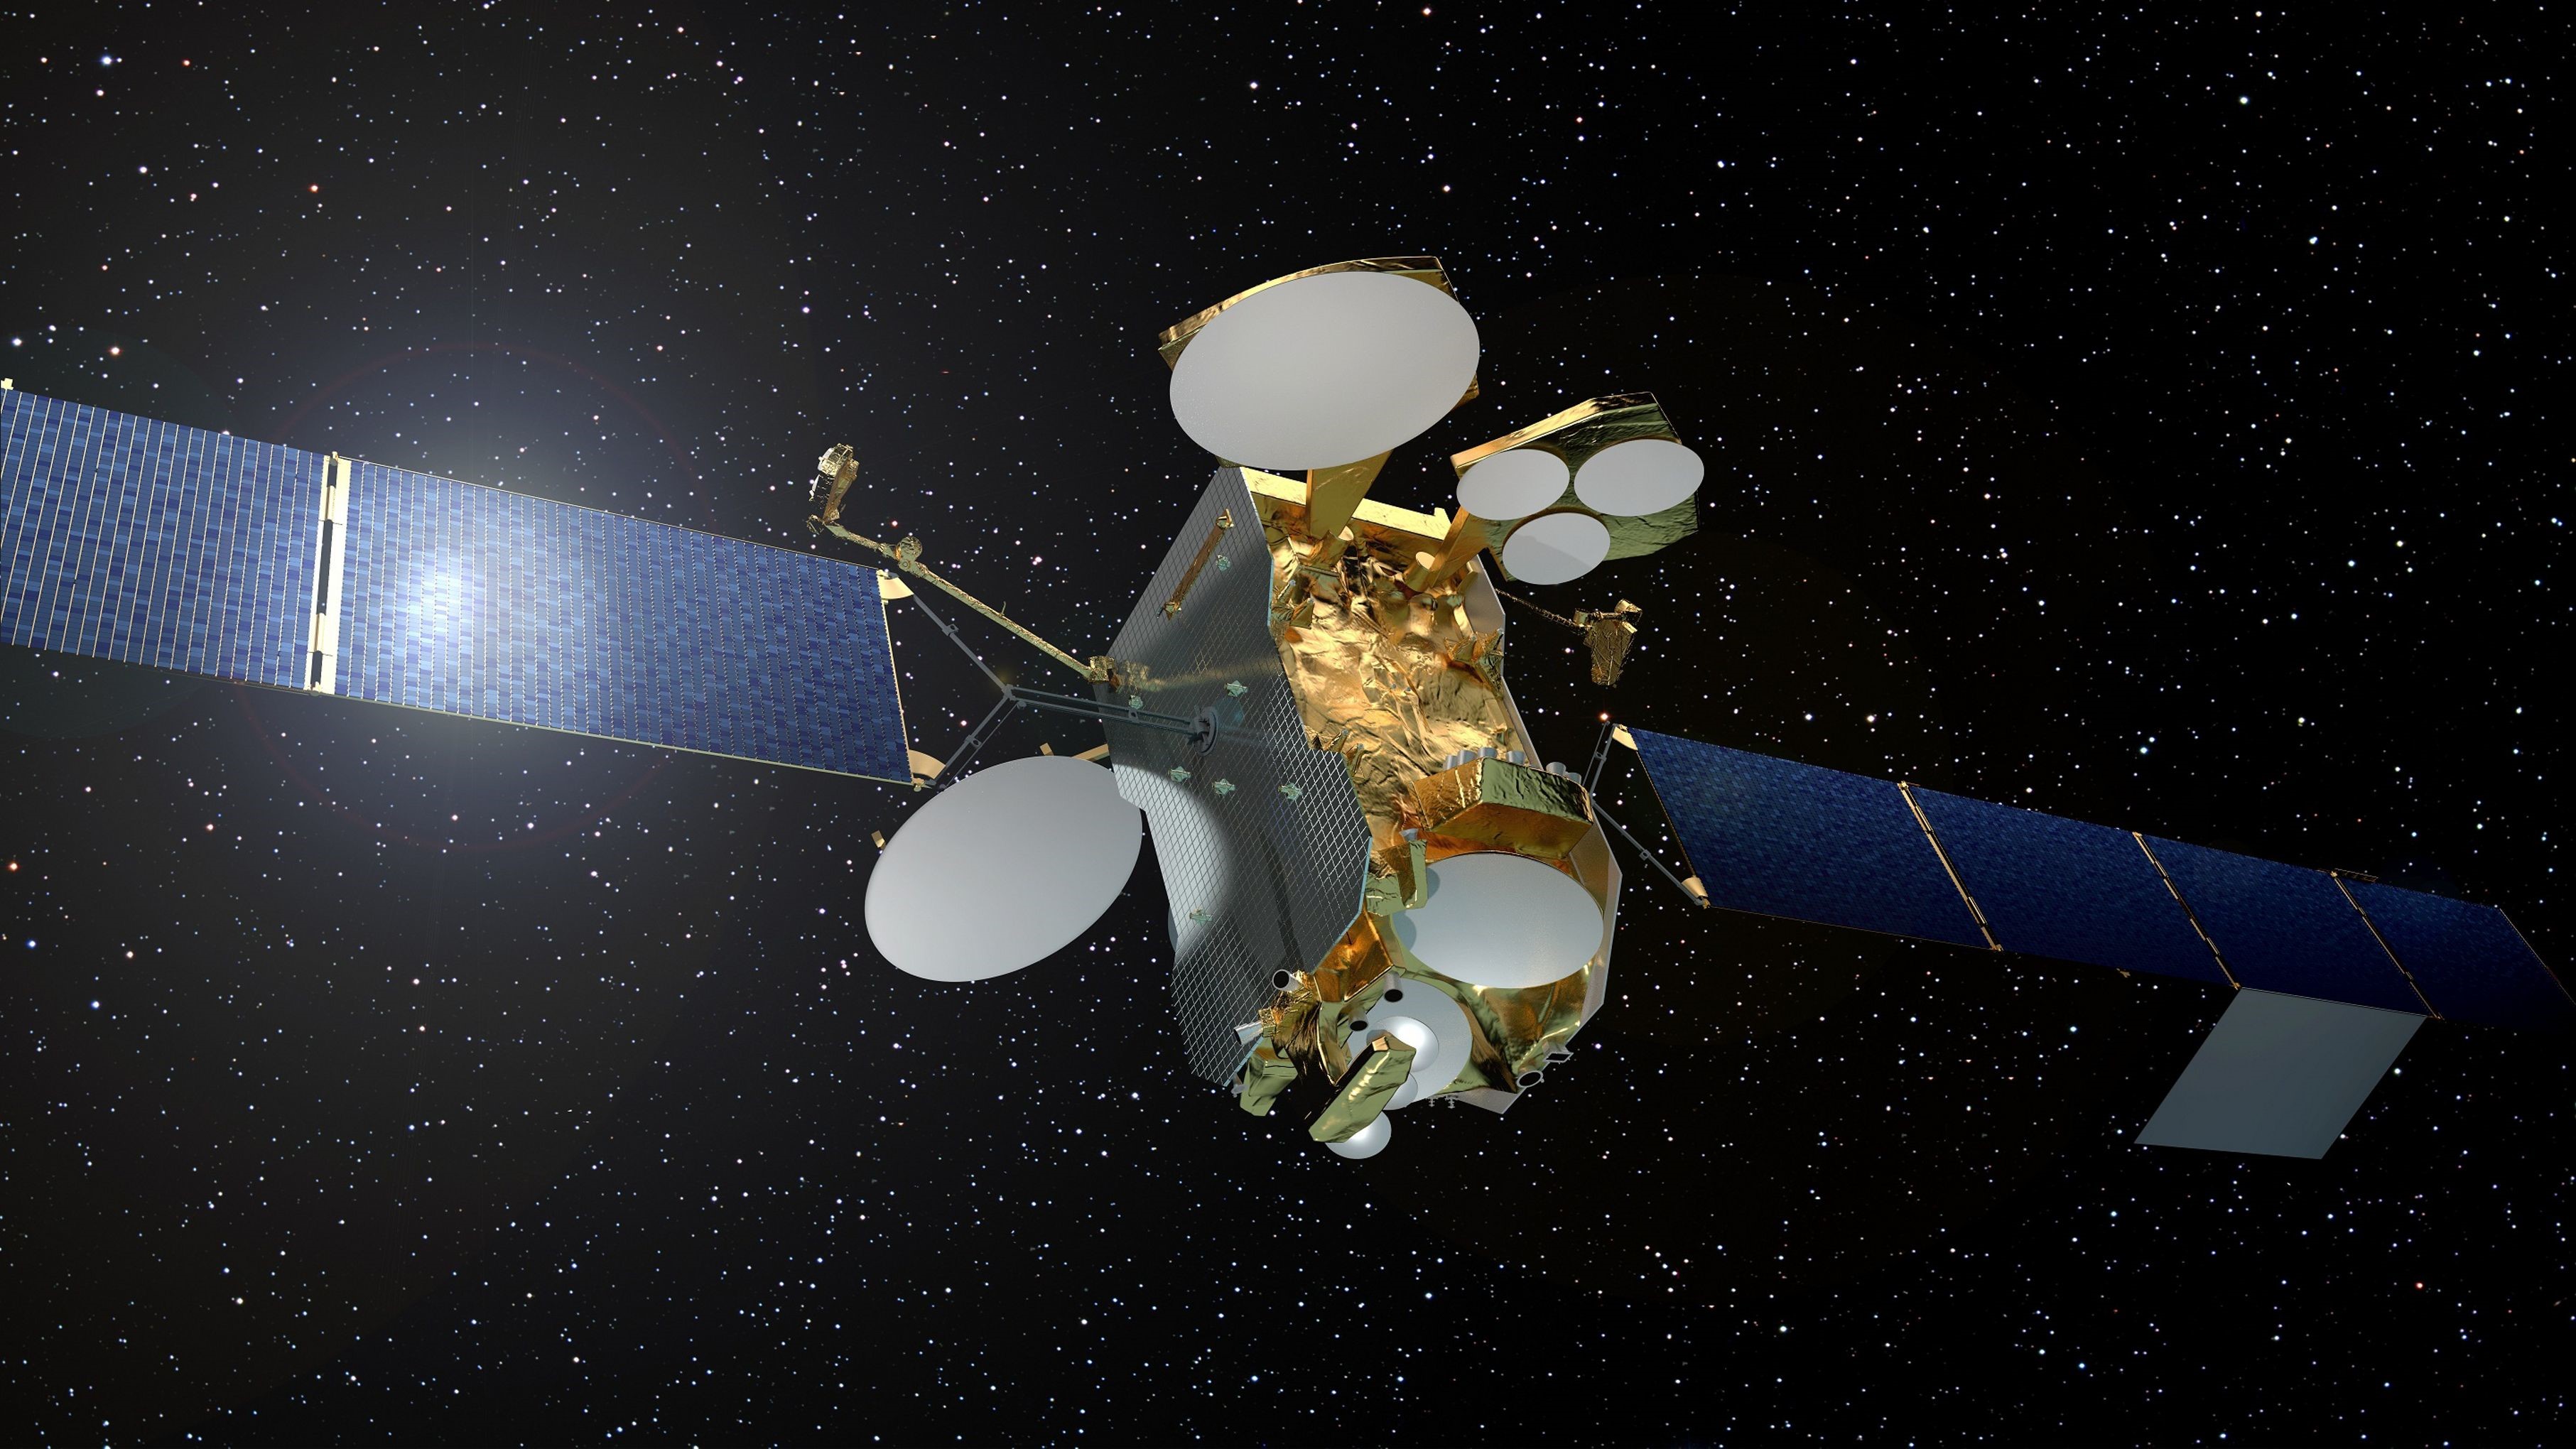 Photo credit : EUTELSAT 172B artist view (Airbus Defence and Space) 